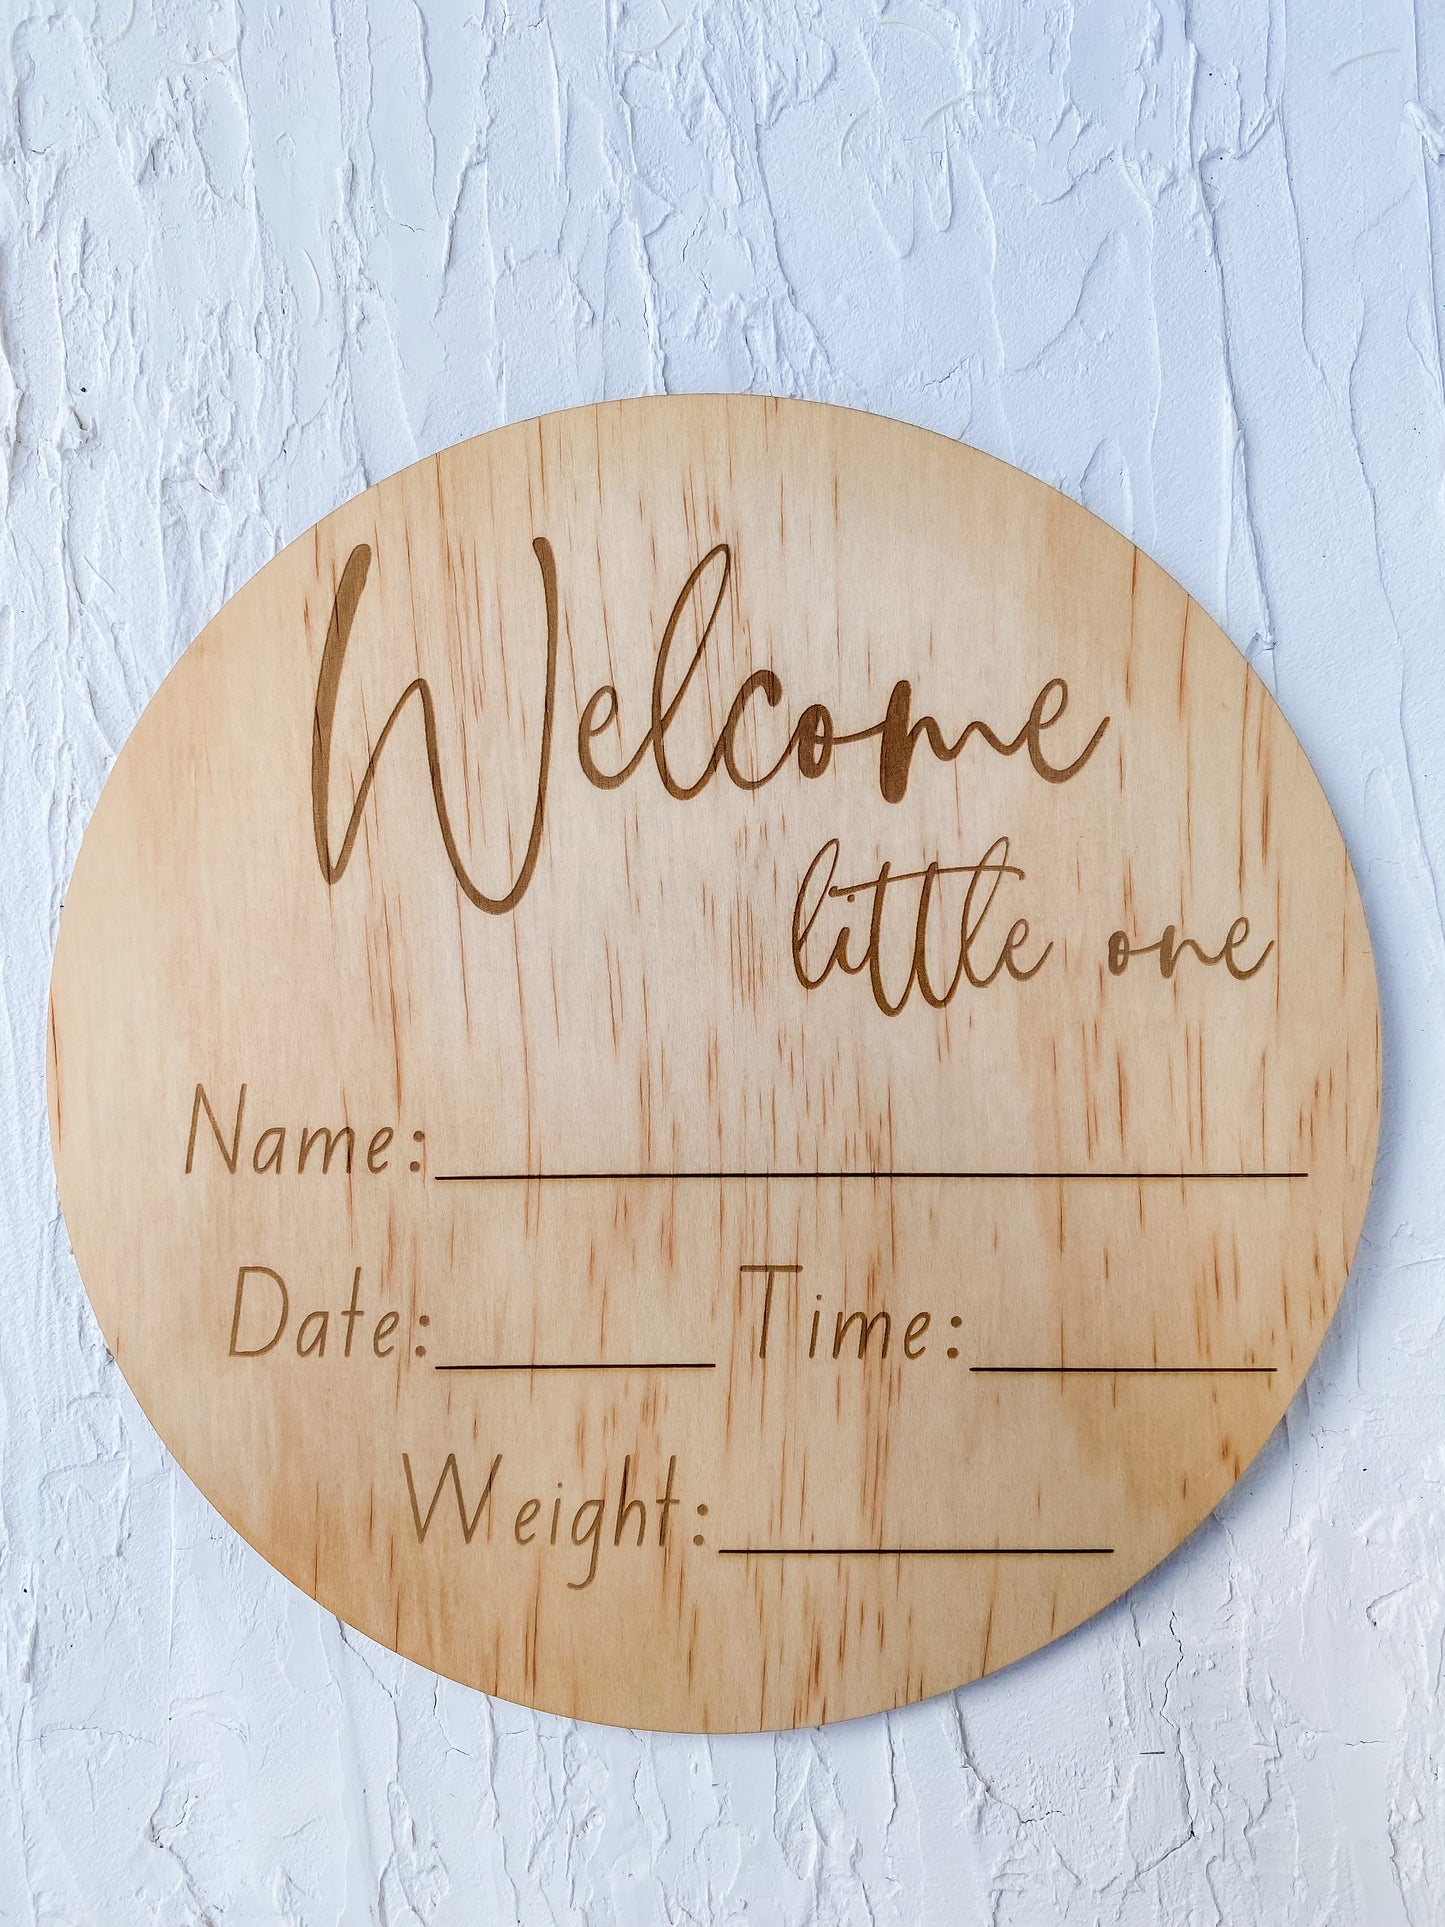 Birth Details Sign - Welcome Little One